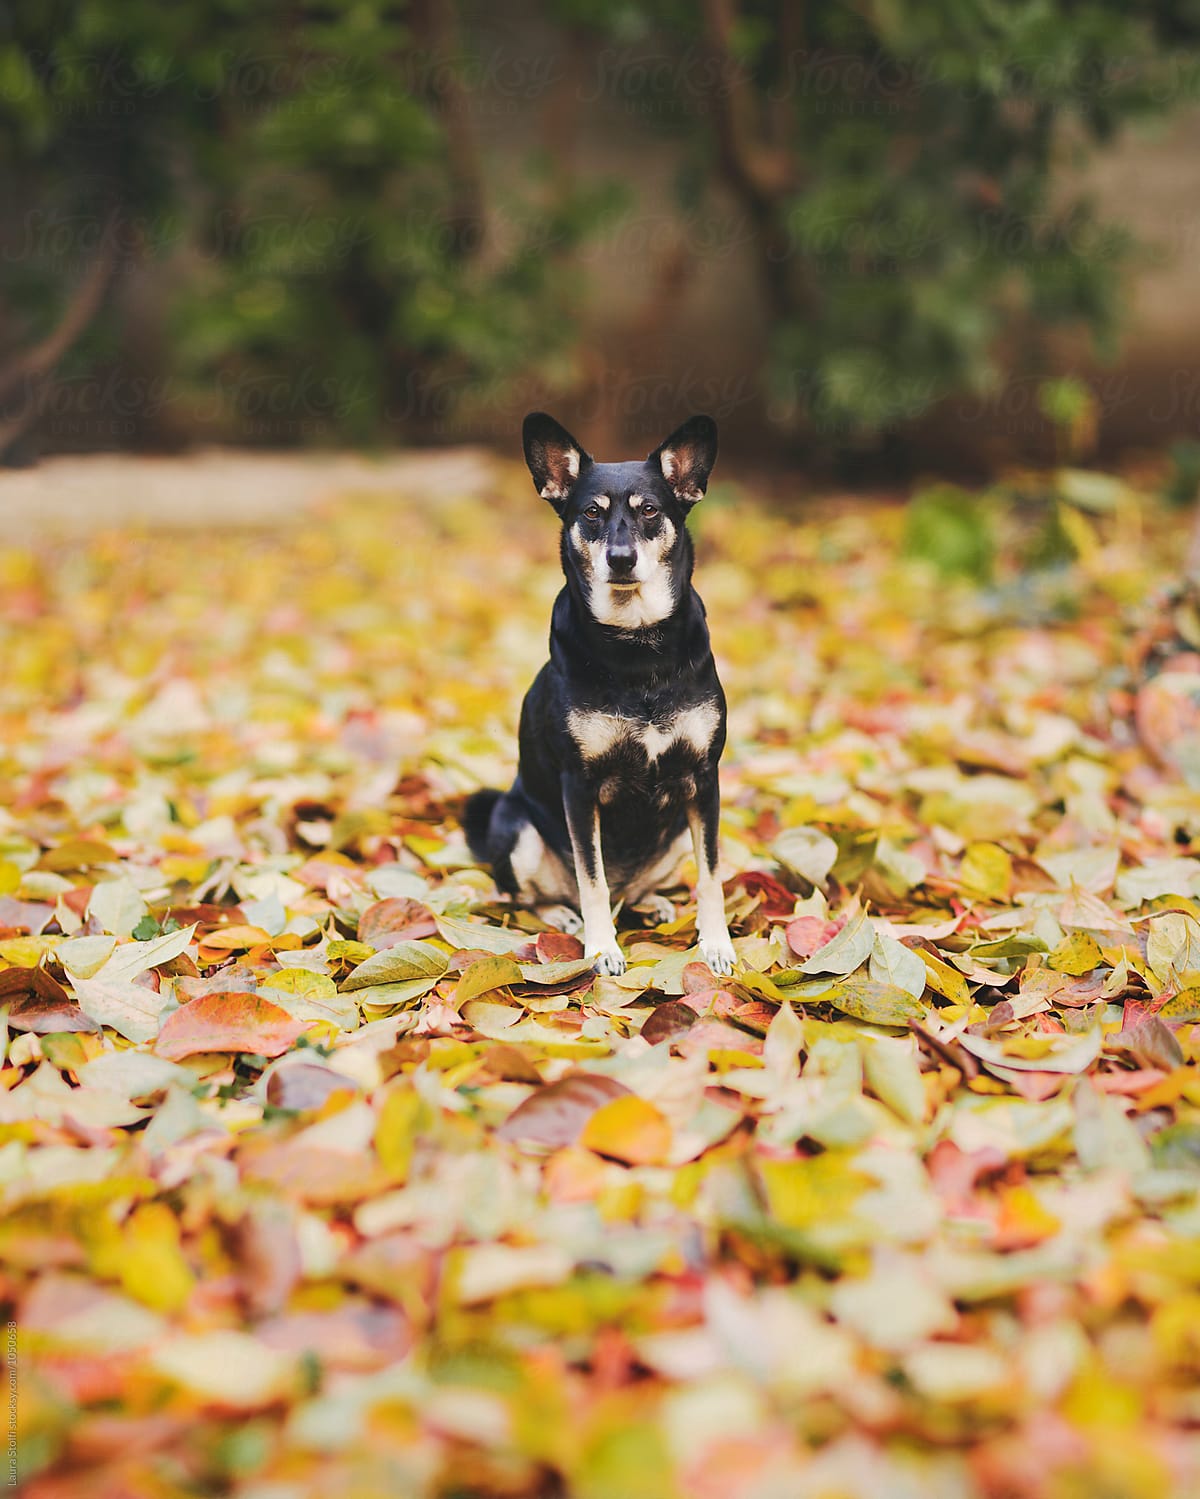 Dog sits on multitude of fallen leaves and looks straight at the camera